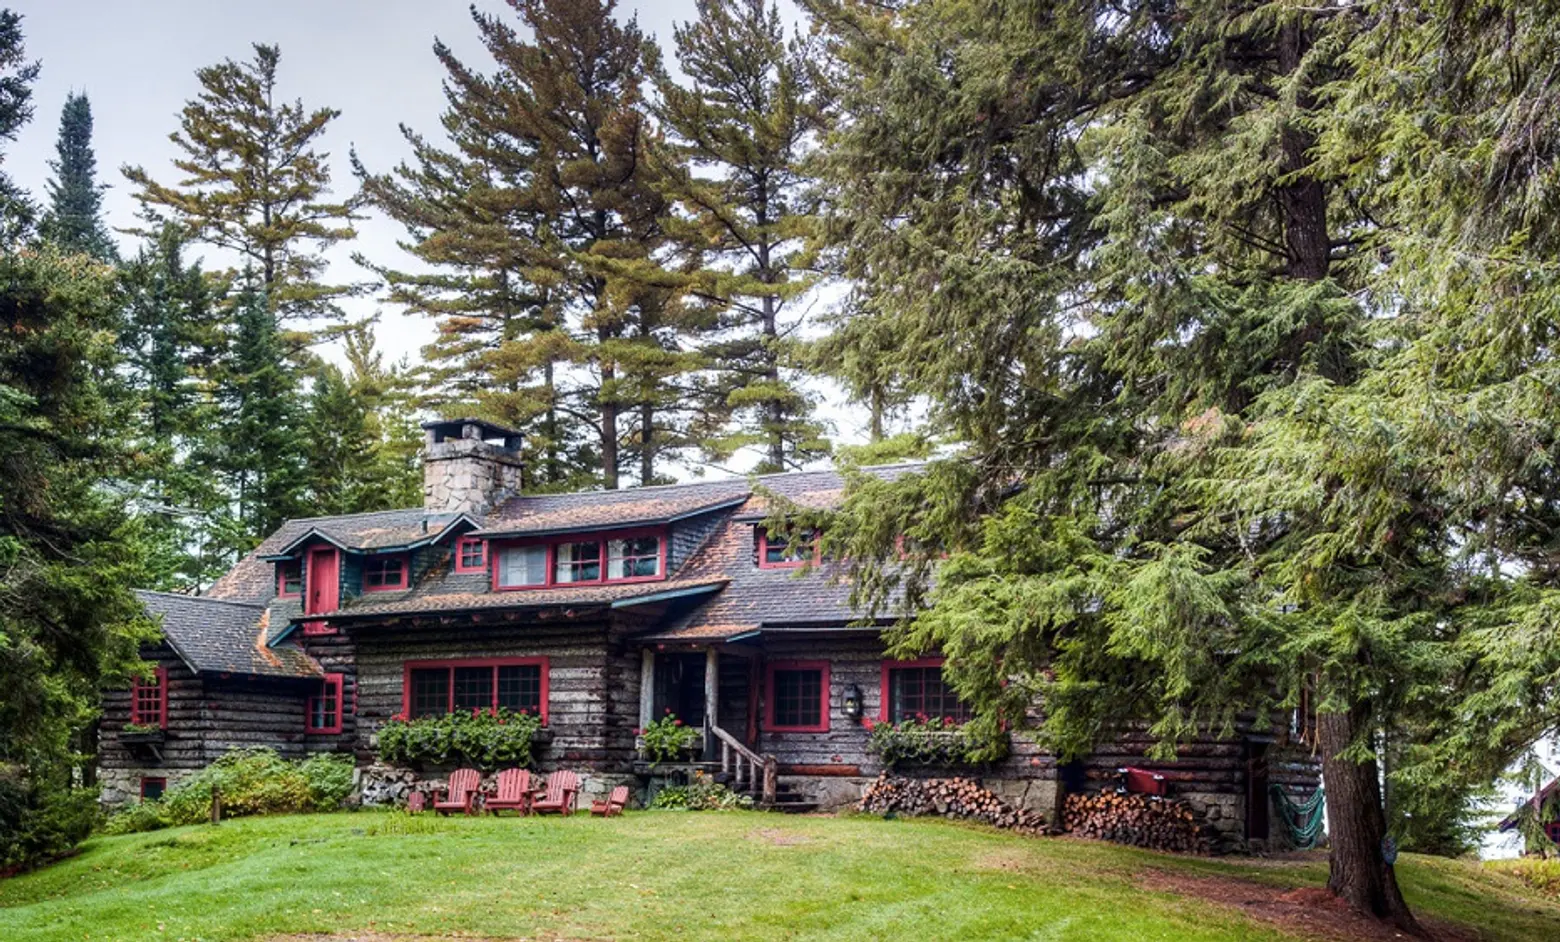 J.P. Morgan’s 120-year-old ‘Great Camp Uncas’ in the Adirondack wilderness reduced to $2.7M